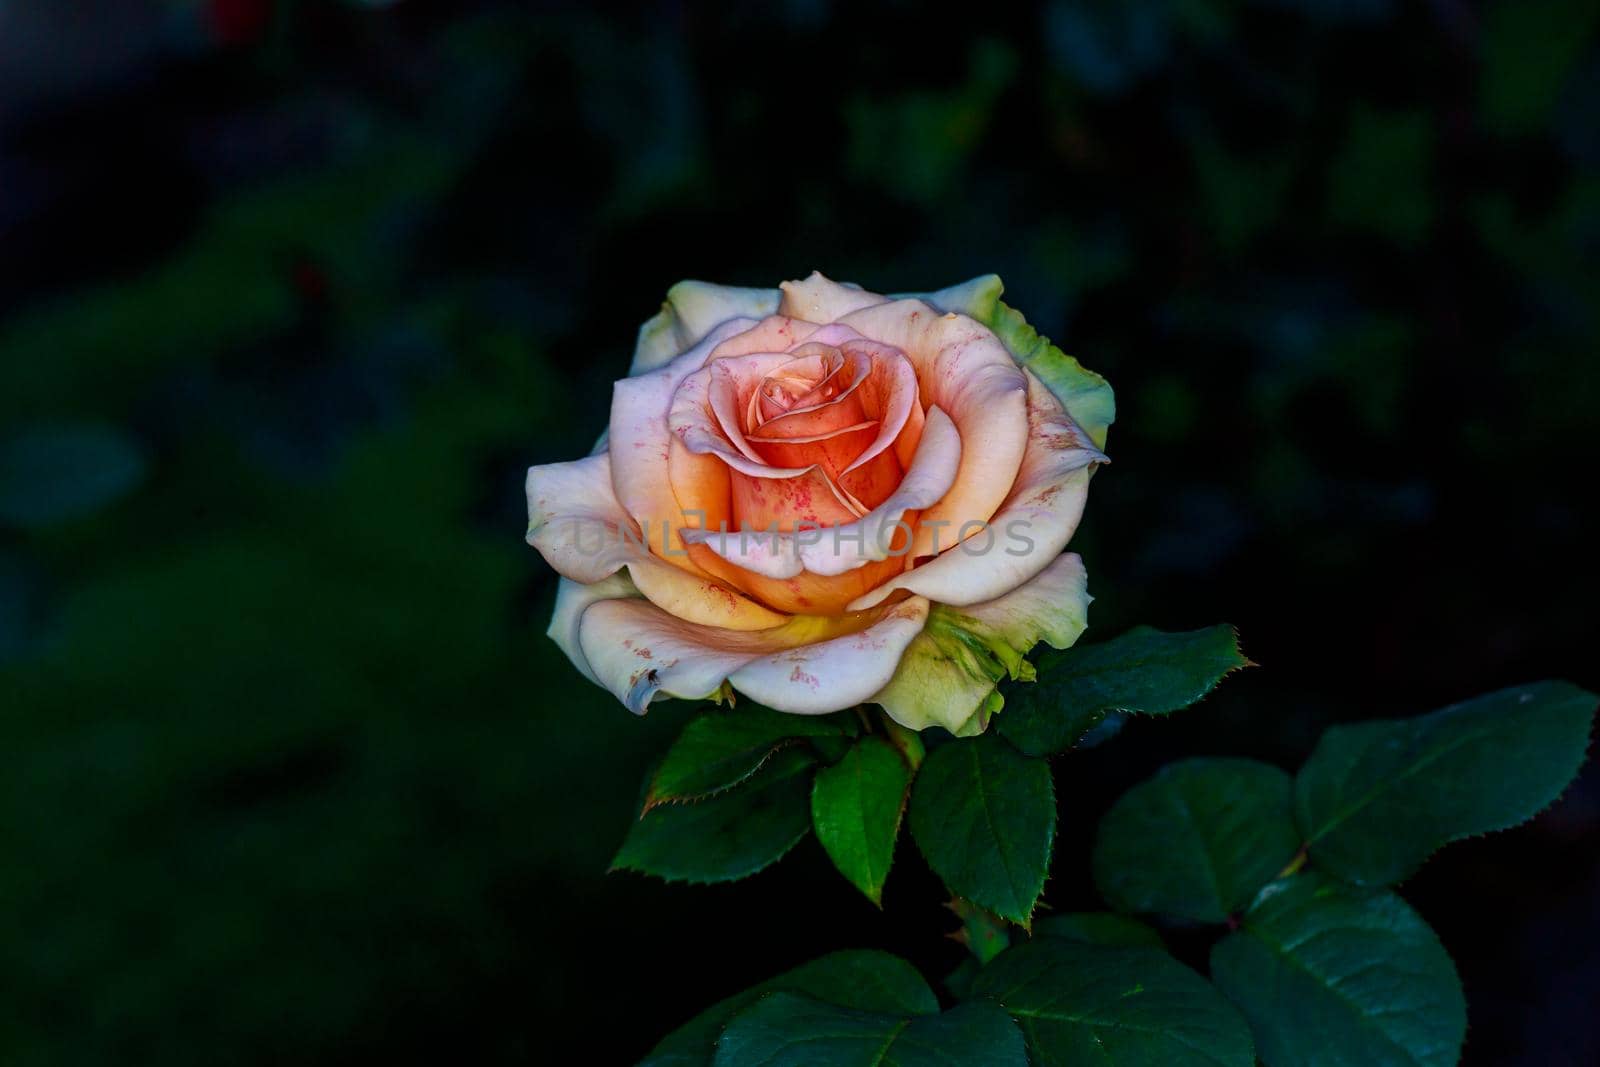 Beautiful Rose in Full Blossom by gepeng